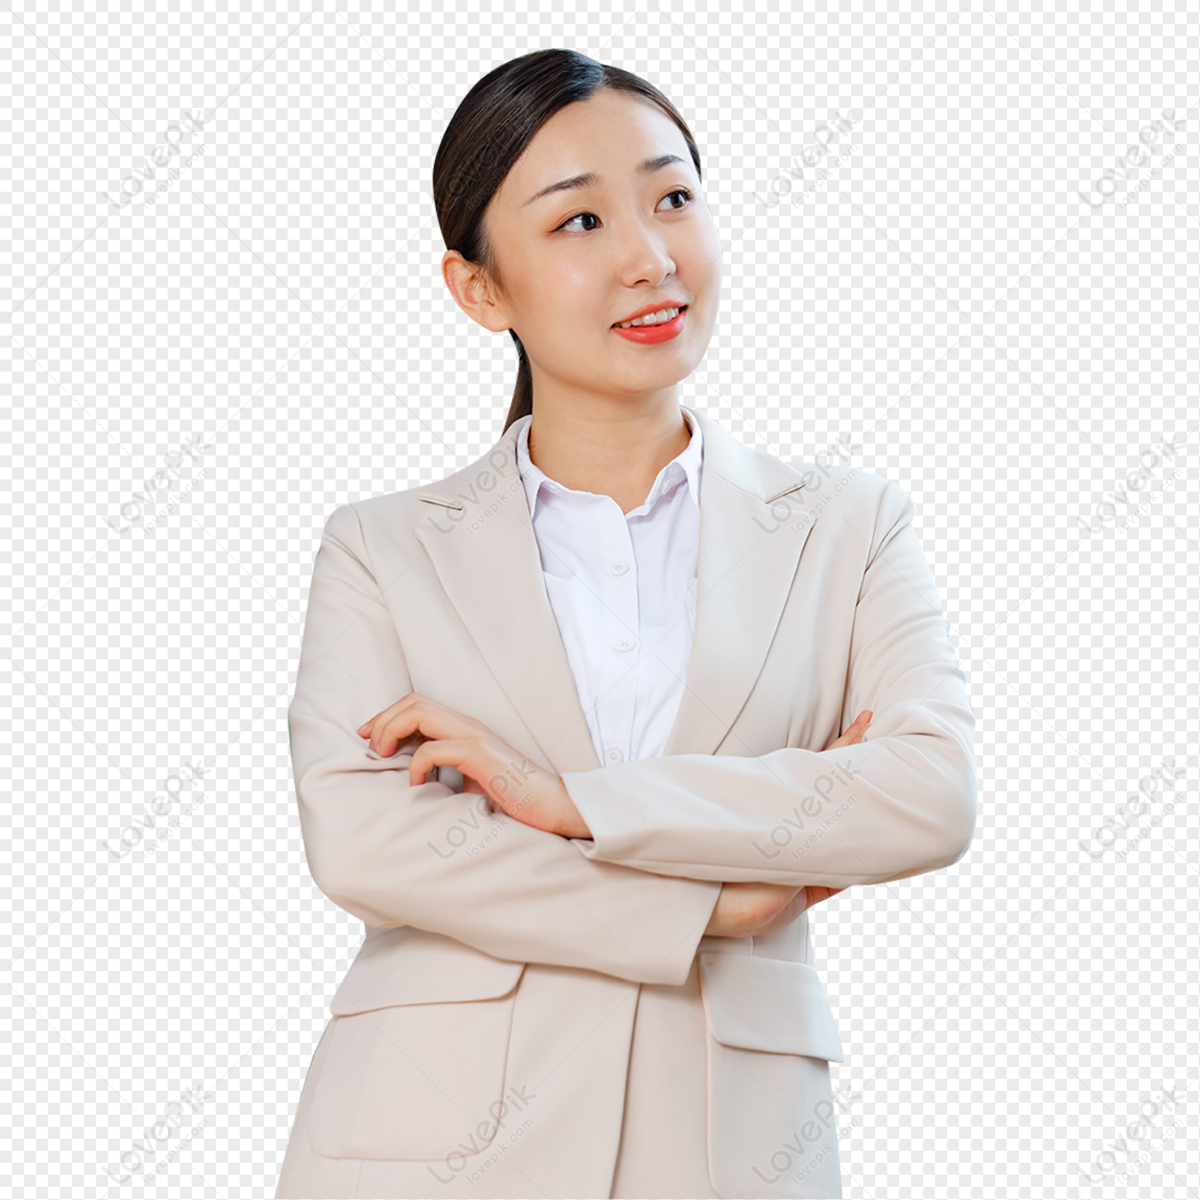 Workplace White-collar Business Female Image PNG Transparent And